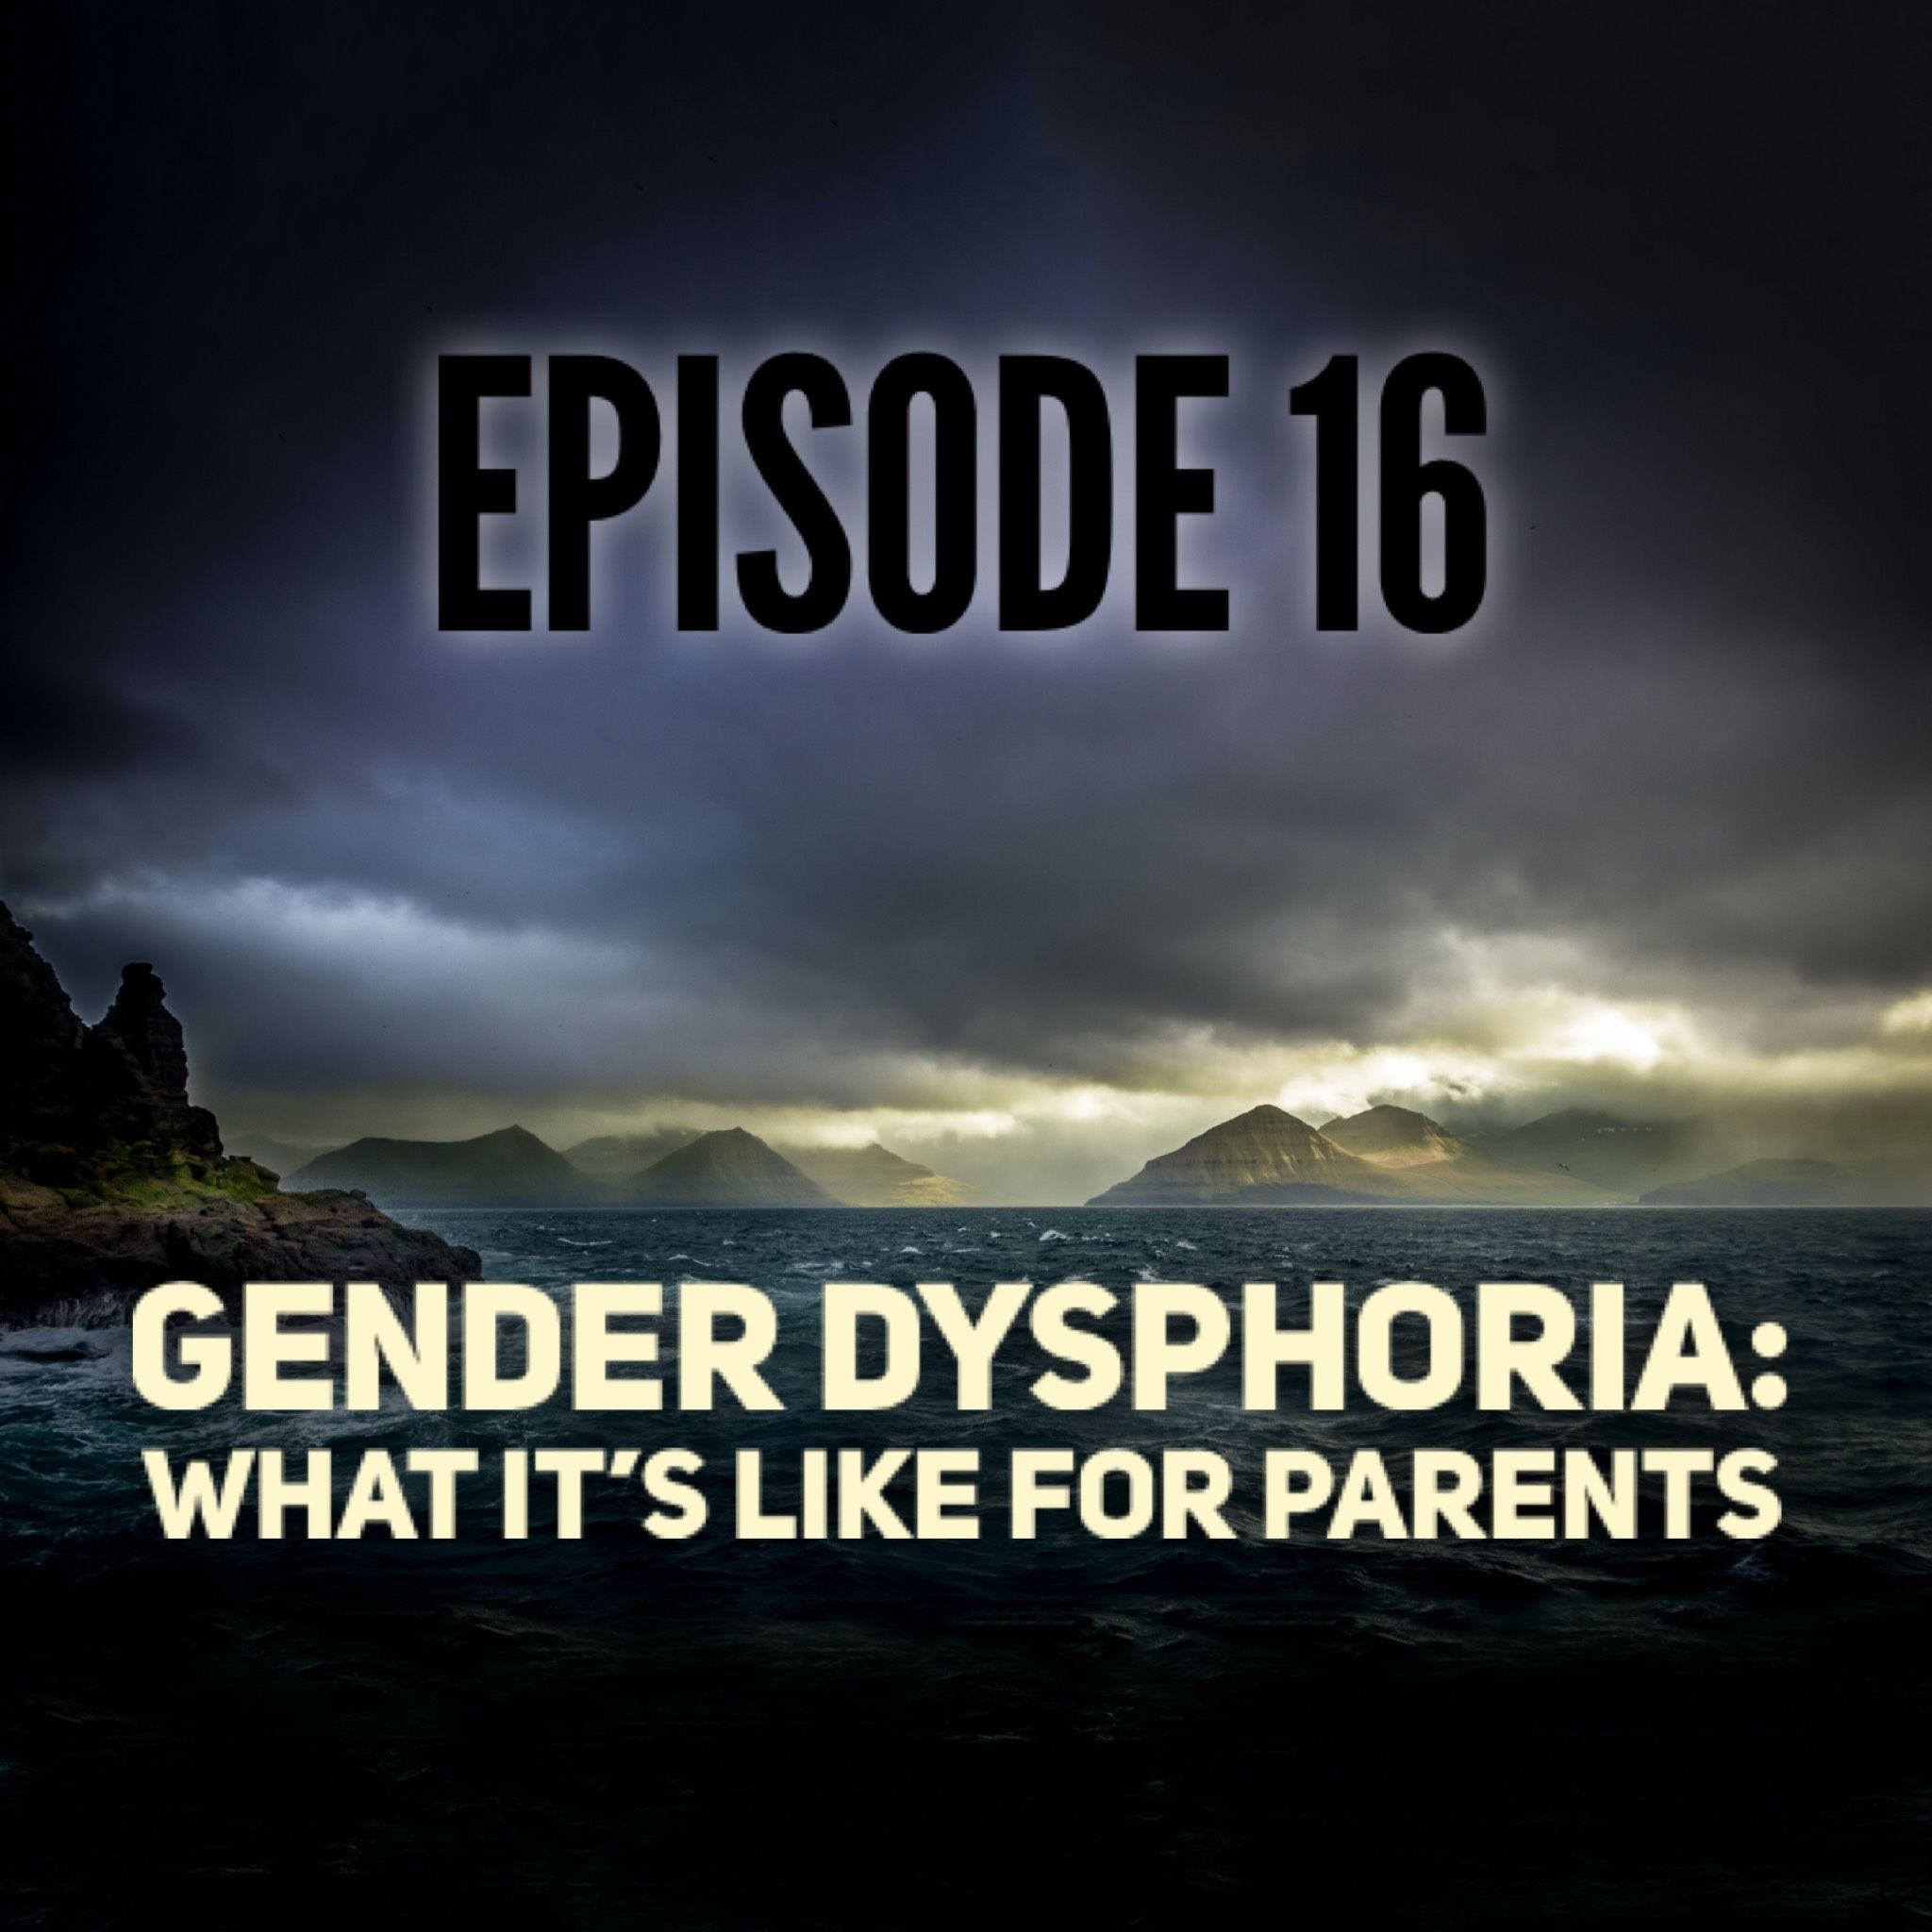 16 - Gender Dysphoria: What It's Like For Parents